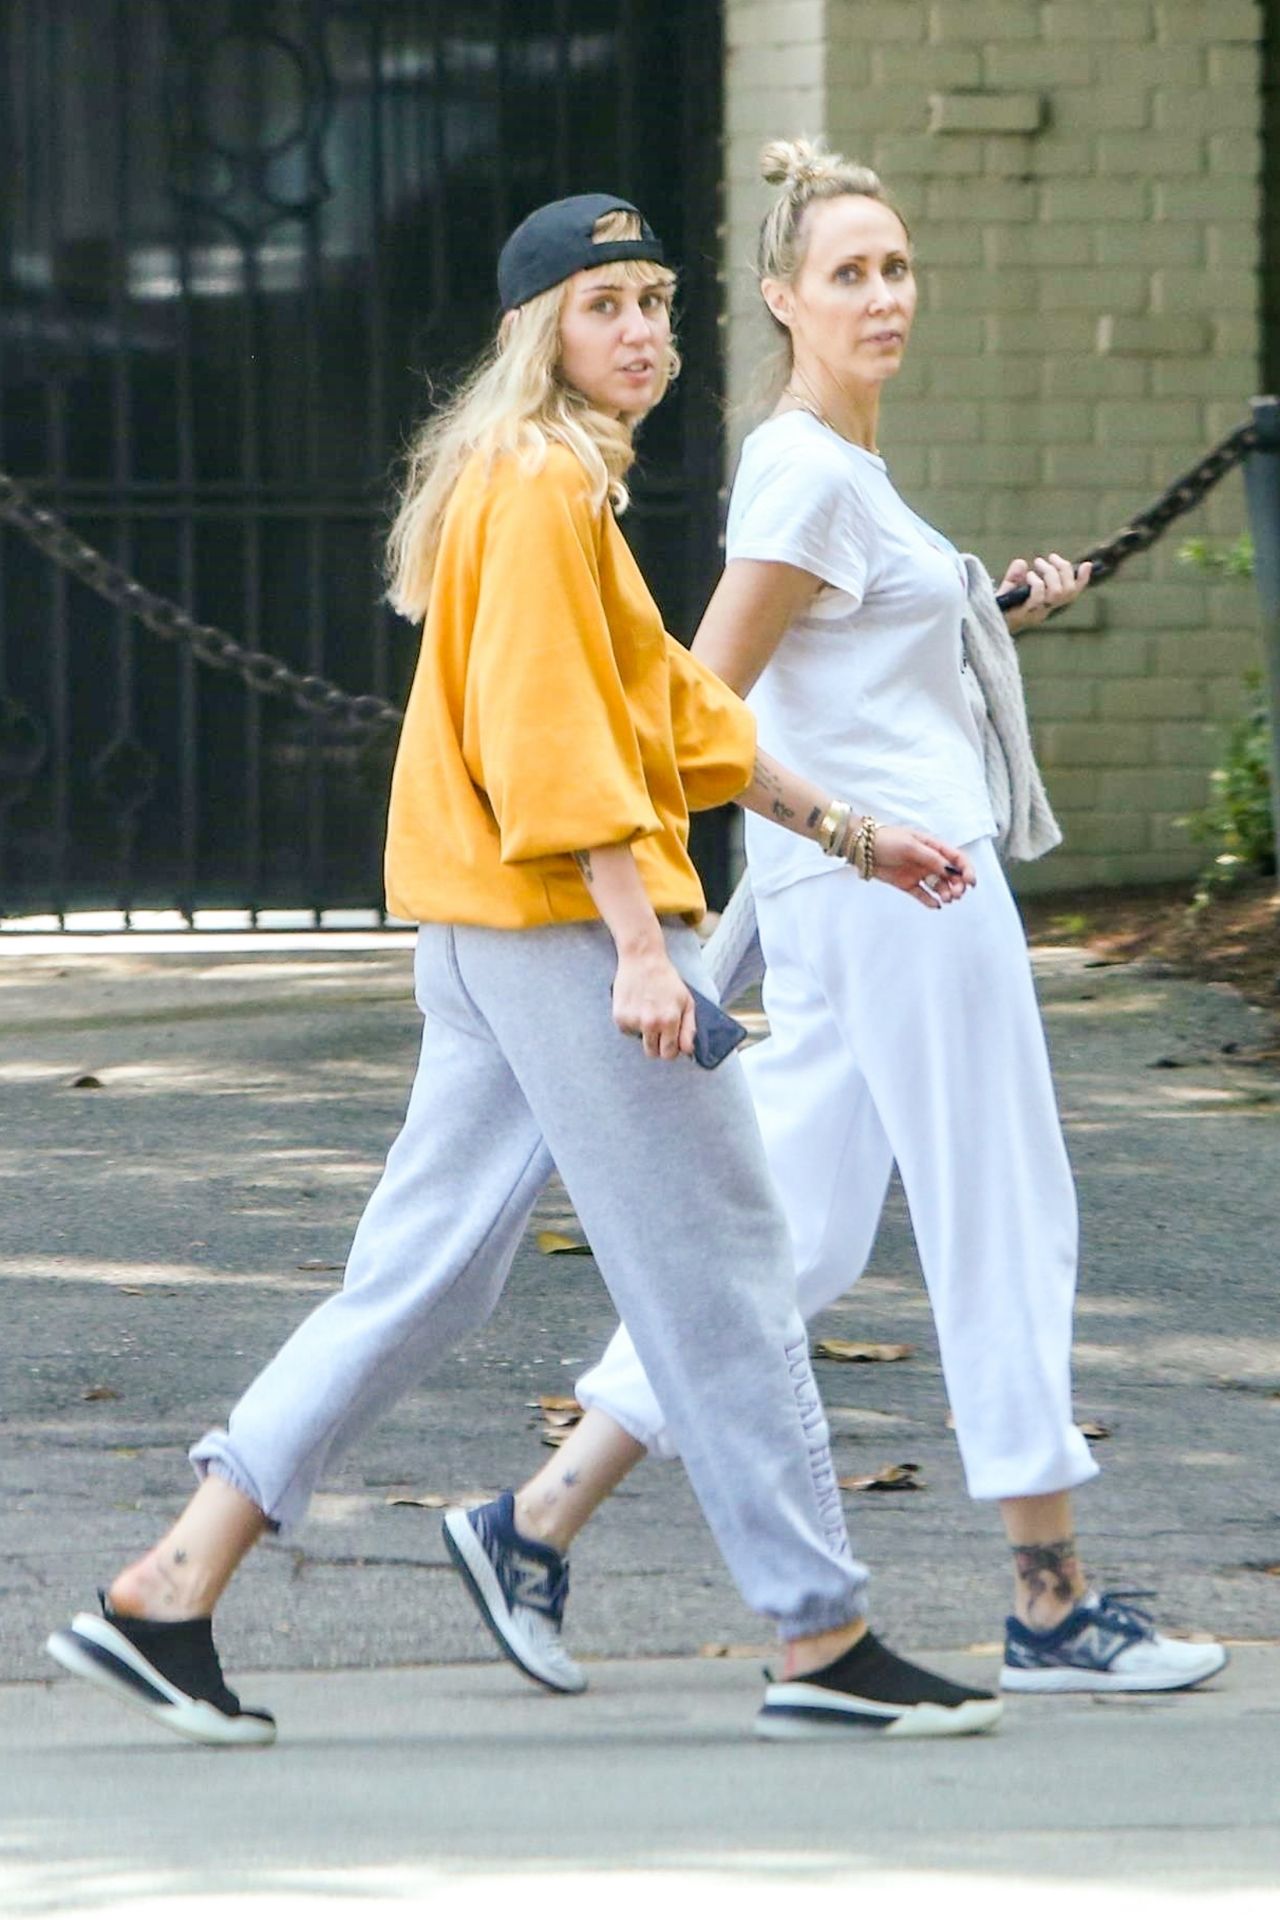 https://celebmafia.com/wp-content/uploads/2019/06/miley-cyrus-with-her-mom-out-in-los-angeles-06-05-2019-3.jpg